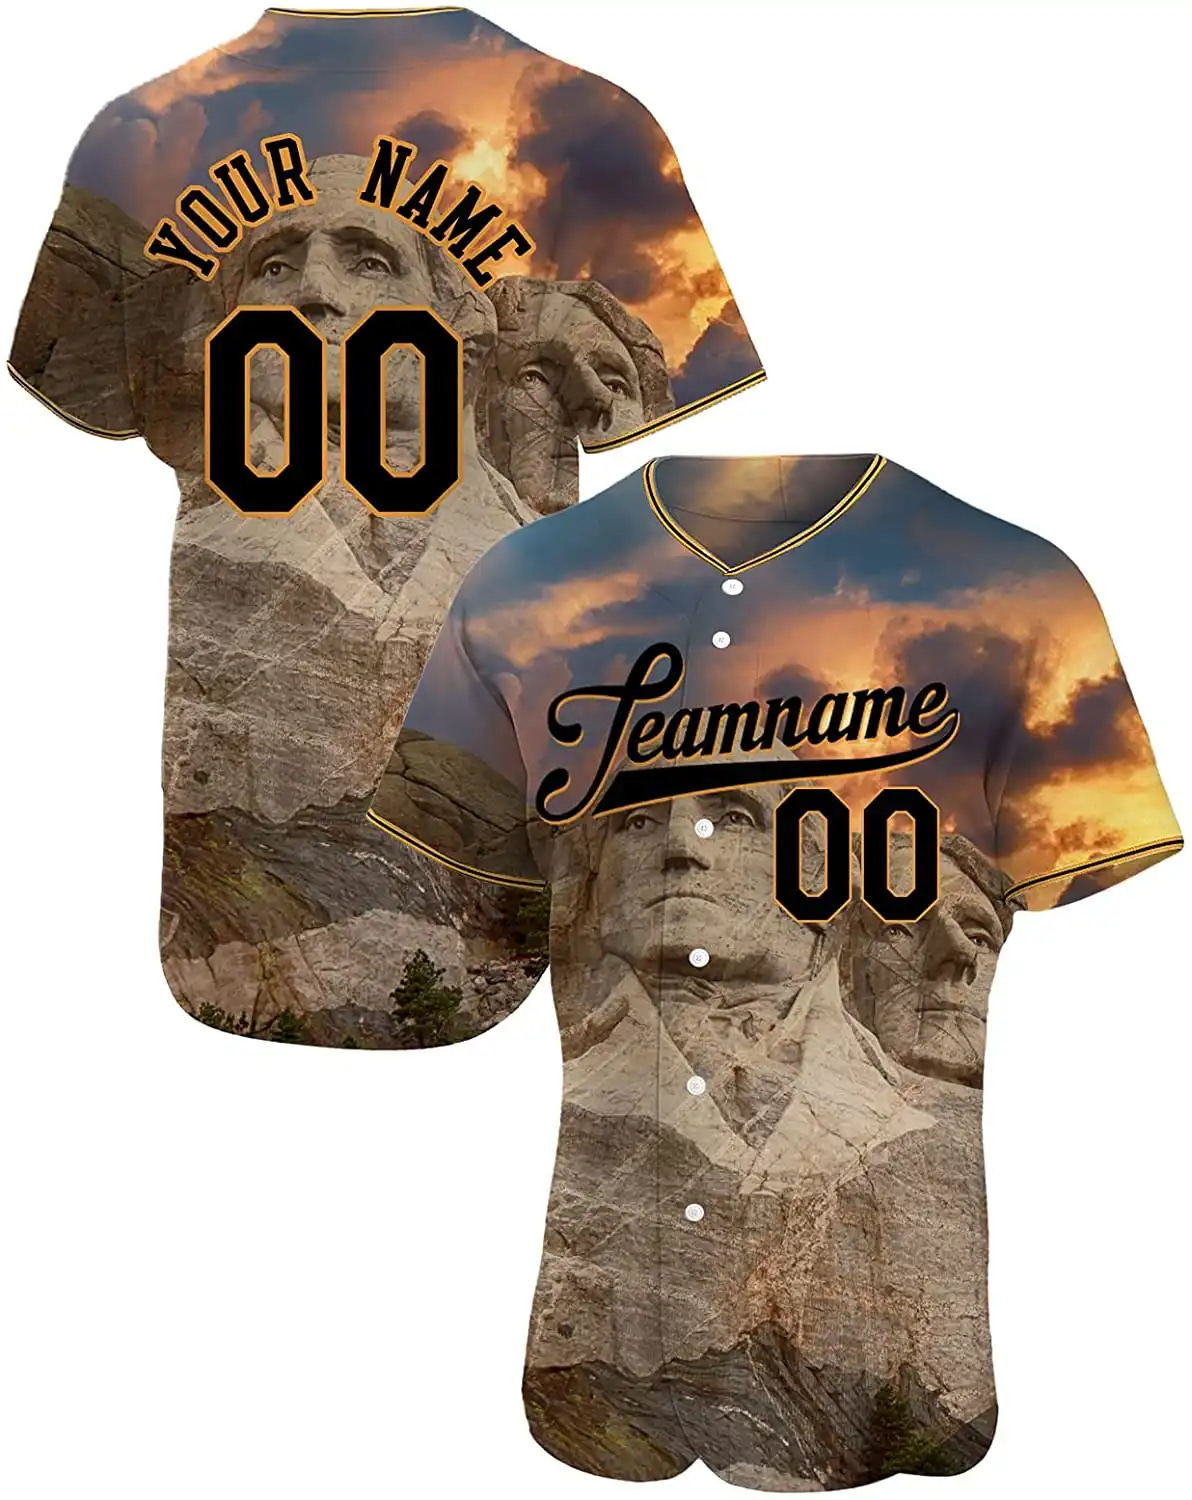 Personalized Mount Rushmore George Wasington Thomas Jefferson Theodore Roosevelt Abraham Lincoln Custom Printed Name And Number Idea Gift For Fans Baseball Jersey